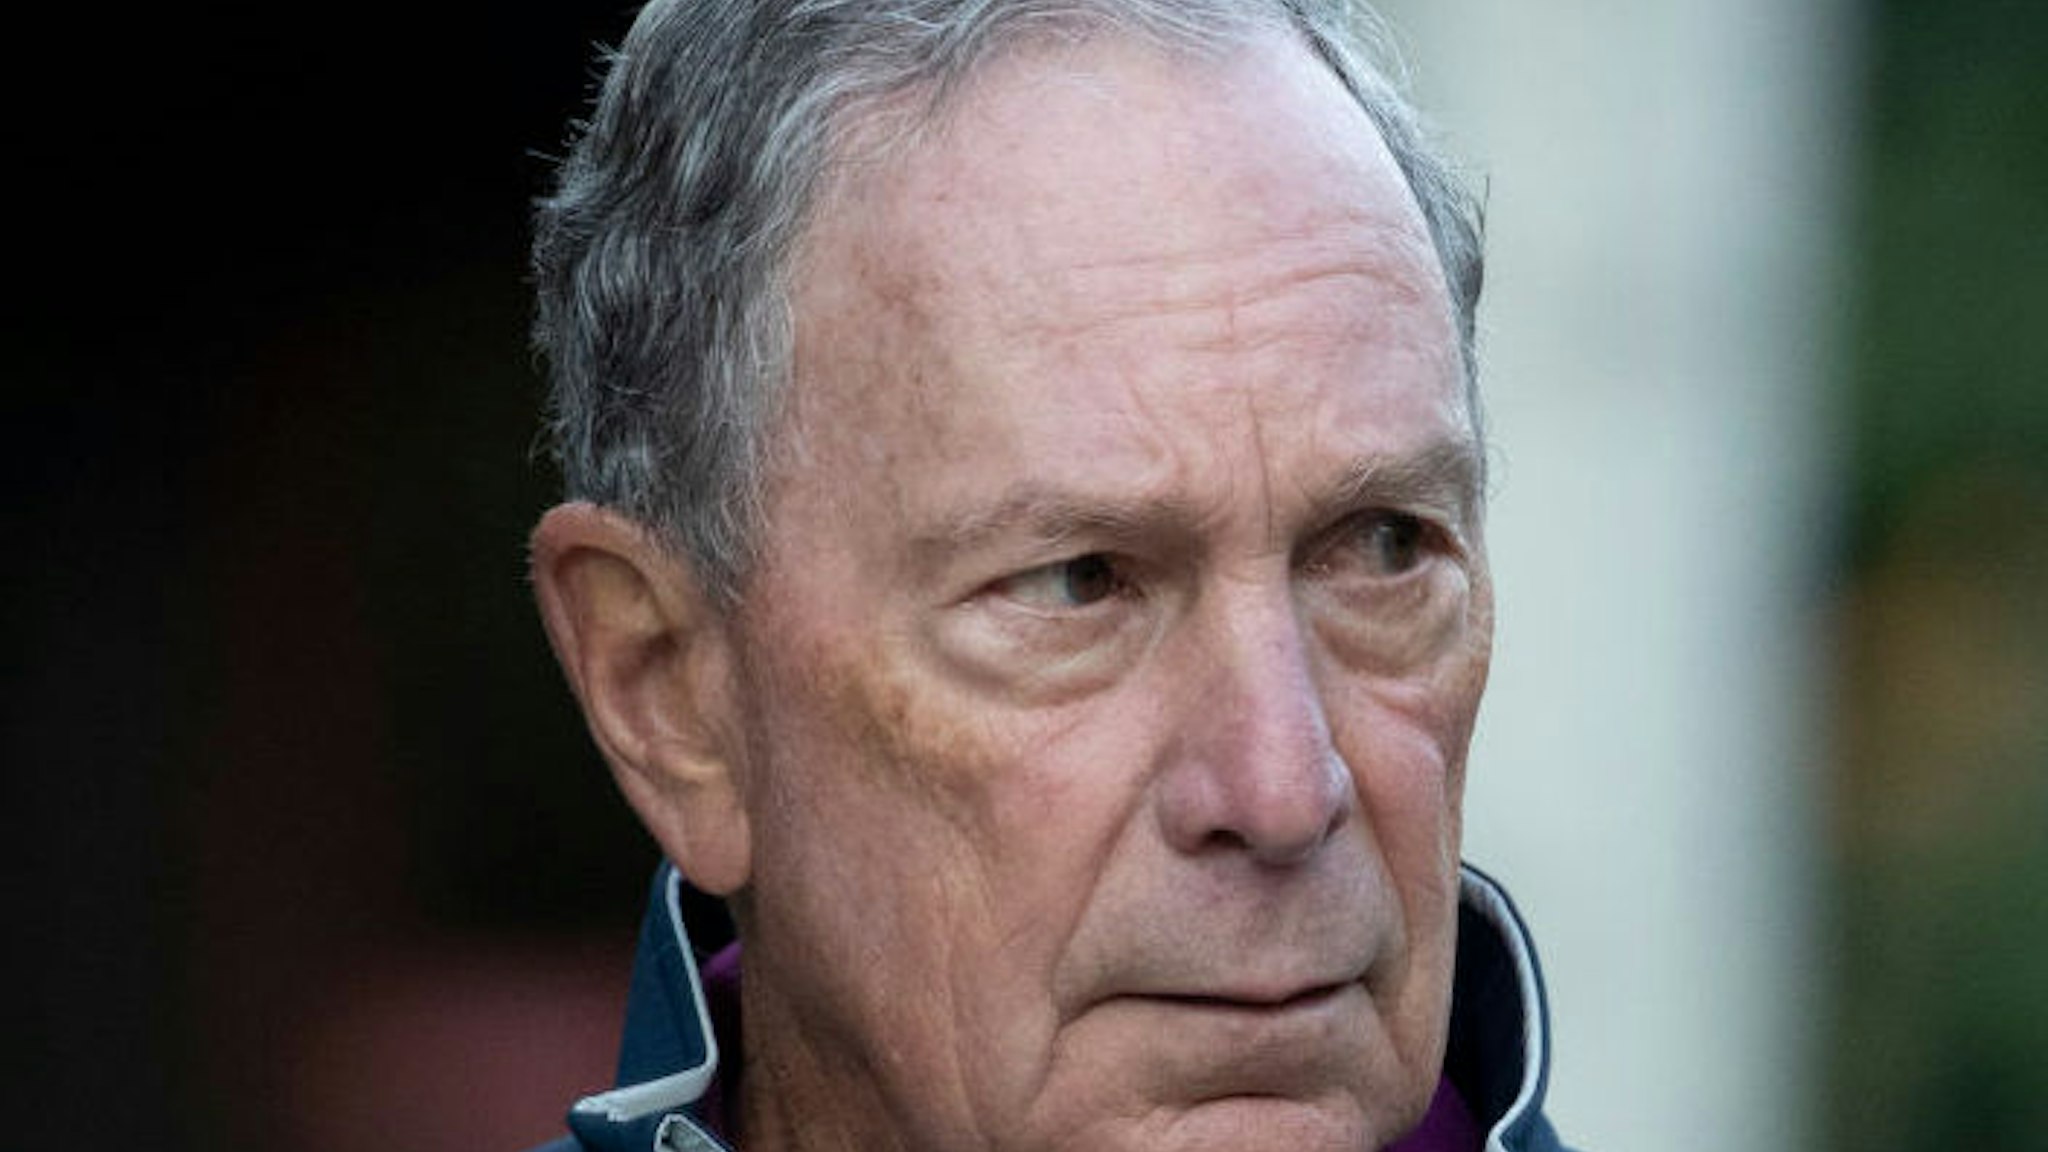 SUN VALLEY, ID - JULY 12: Former New York City mayor Michael Bloomberg attends the annual Allen &amp; Company Sun Valley Conference, July 12, 2019 in Sun Valley, Idaho. Every July, some of the world's most wealthy and powerful businesspeople from the media, finance, and technology spheres converge at the Sun Valley Resort for the exclusive weeklong conference.